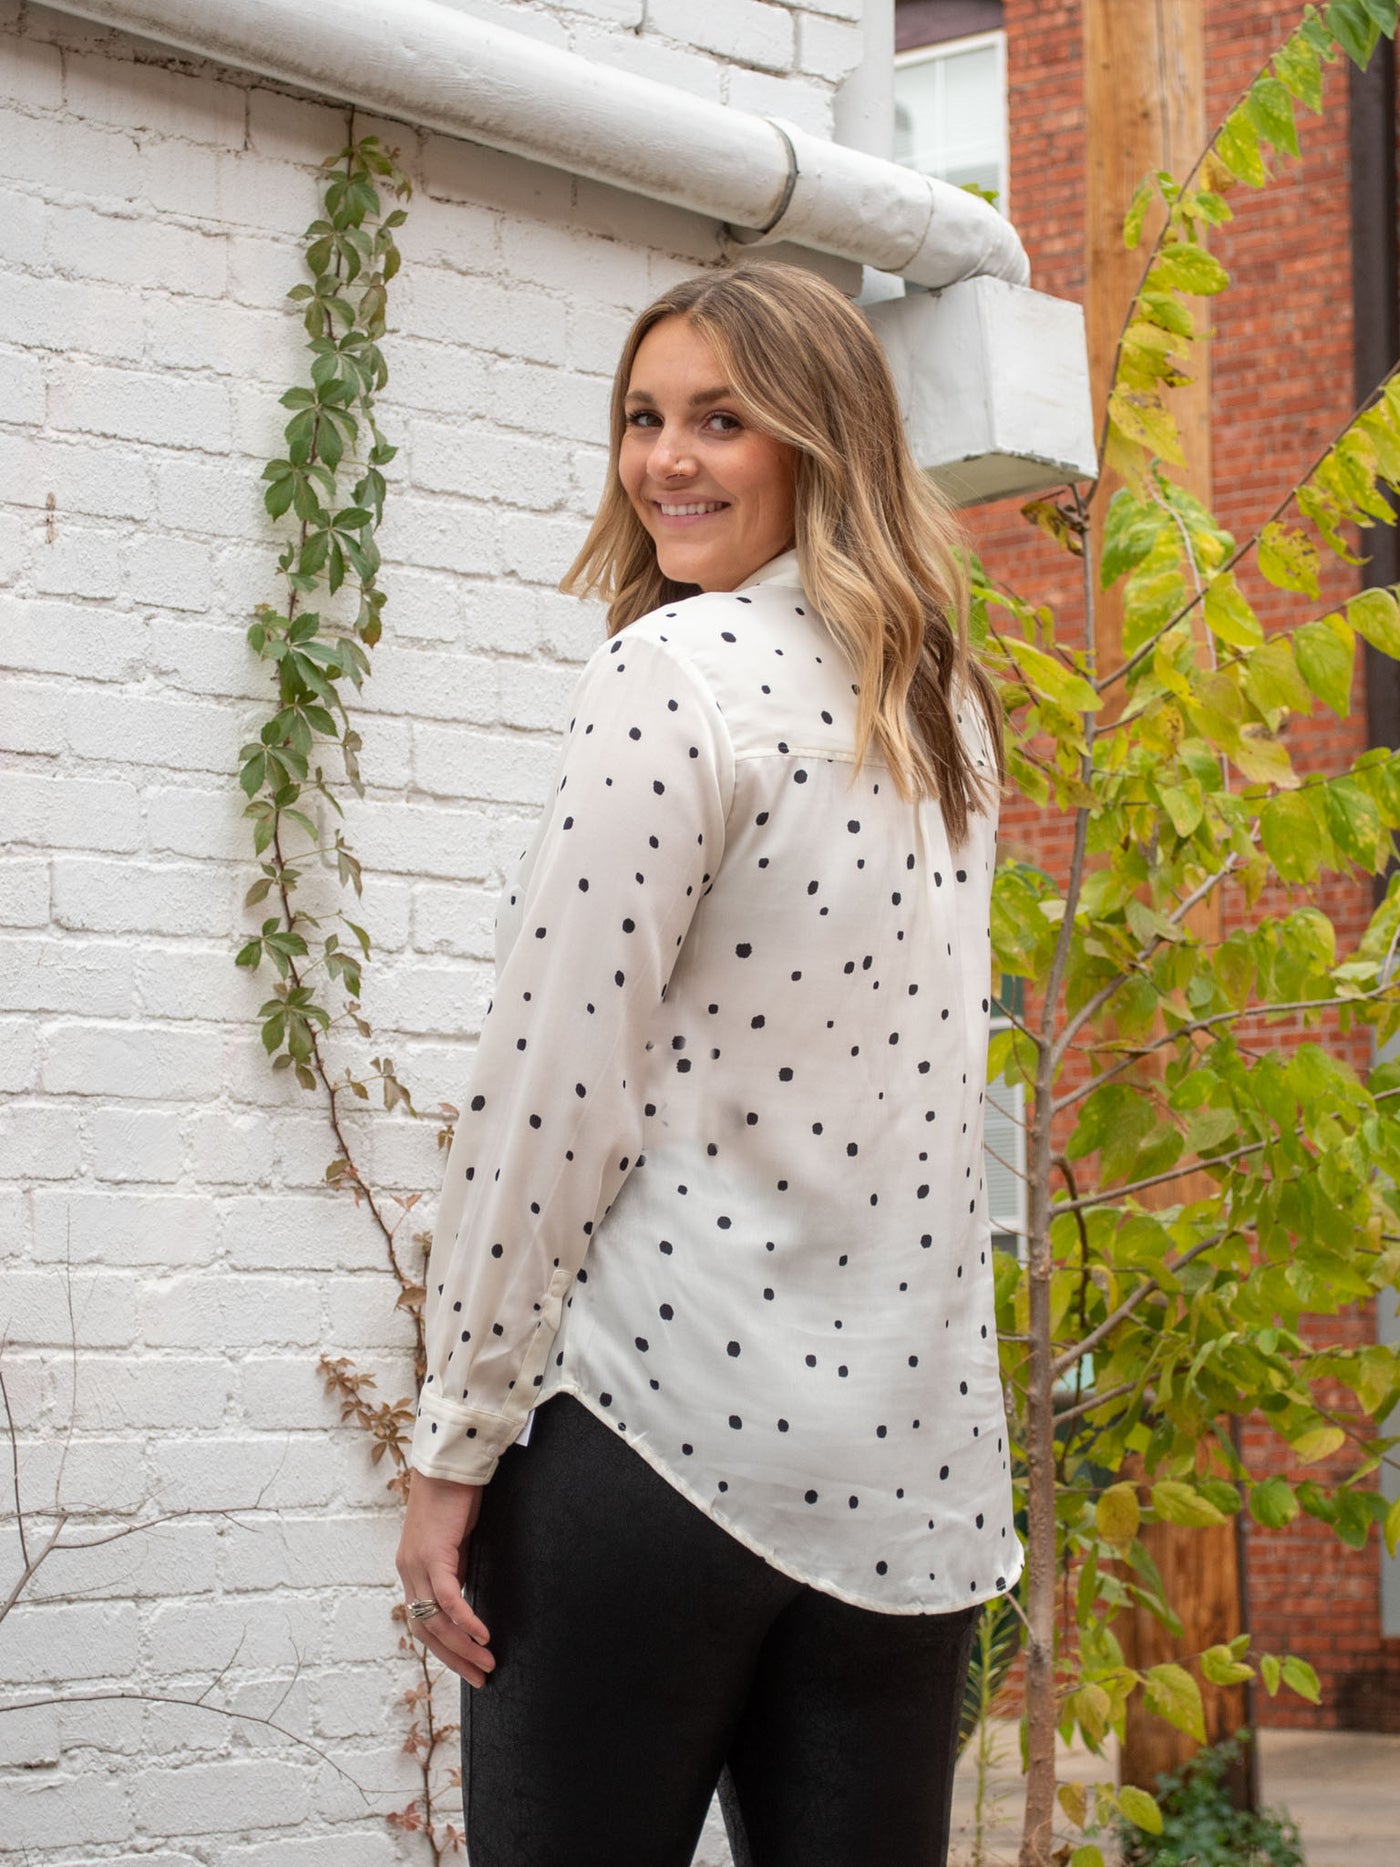 A model wearing a white button down blouse with polka dots. The model has it paired with pleather pants.